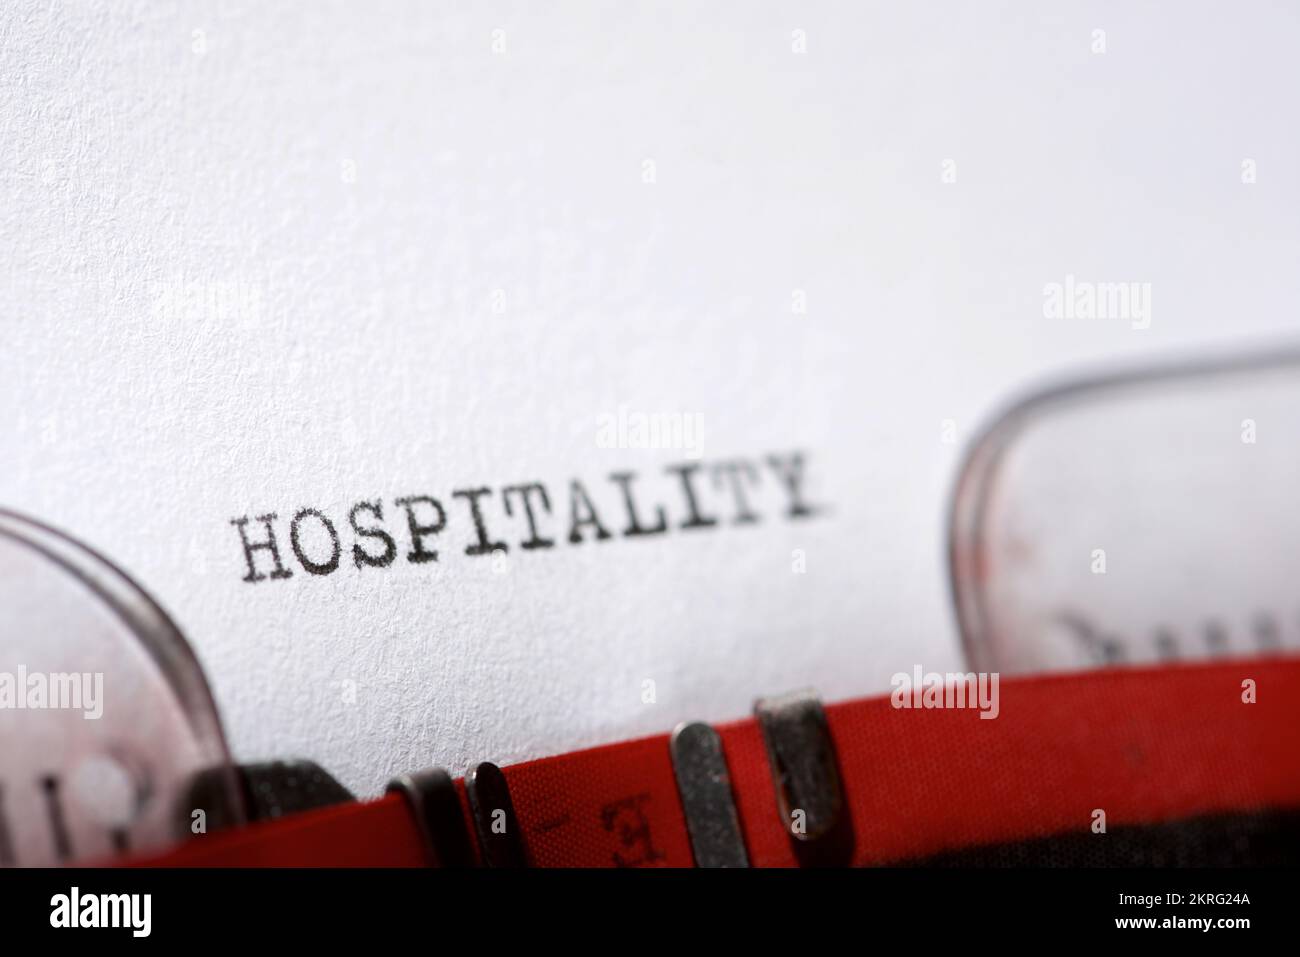 Hospitality word written with a typewriter. Stock Photo